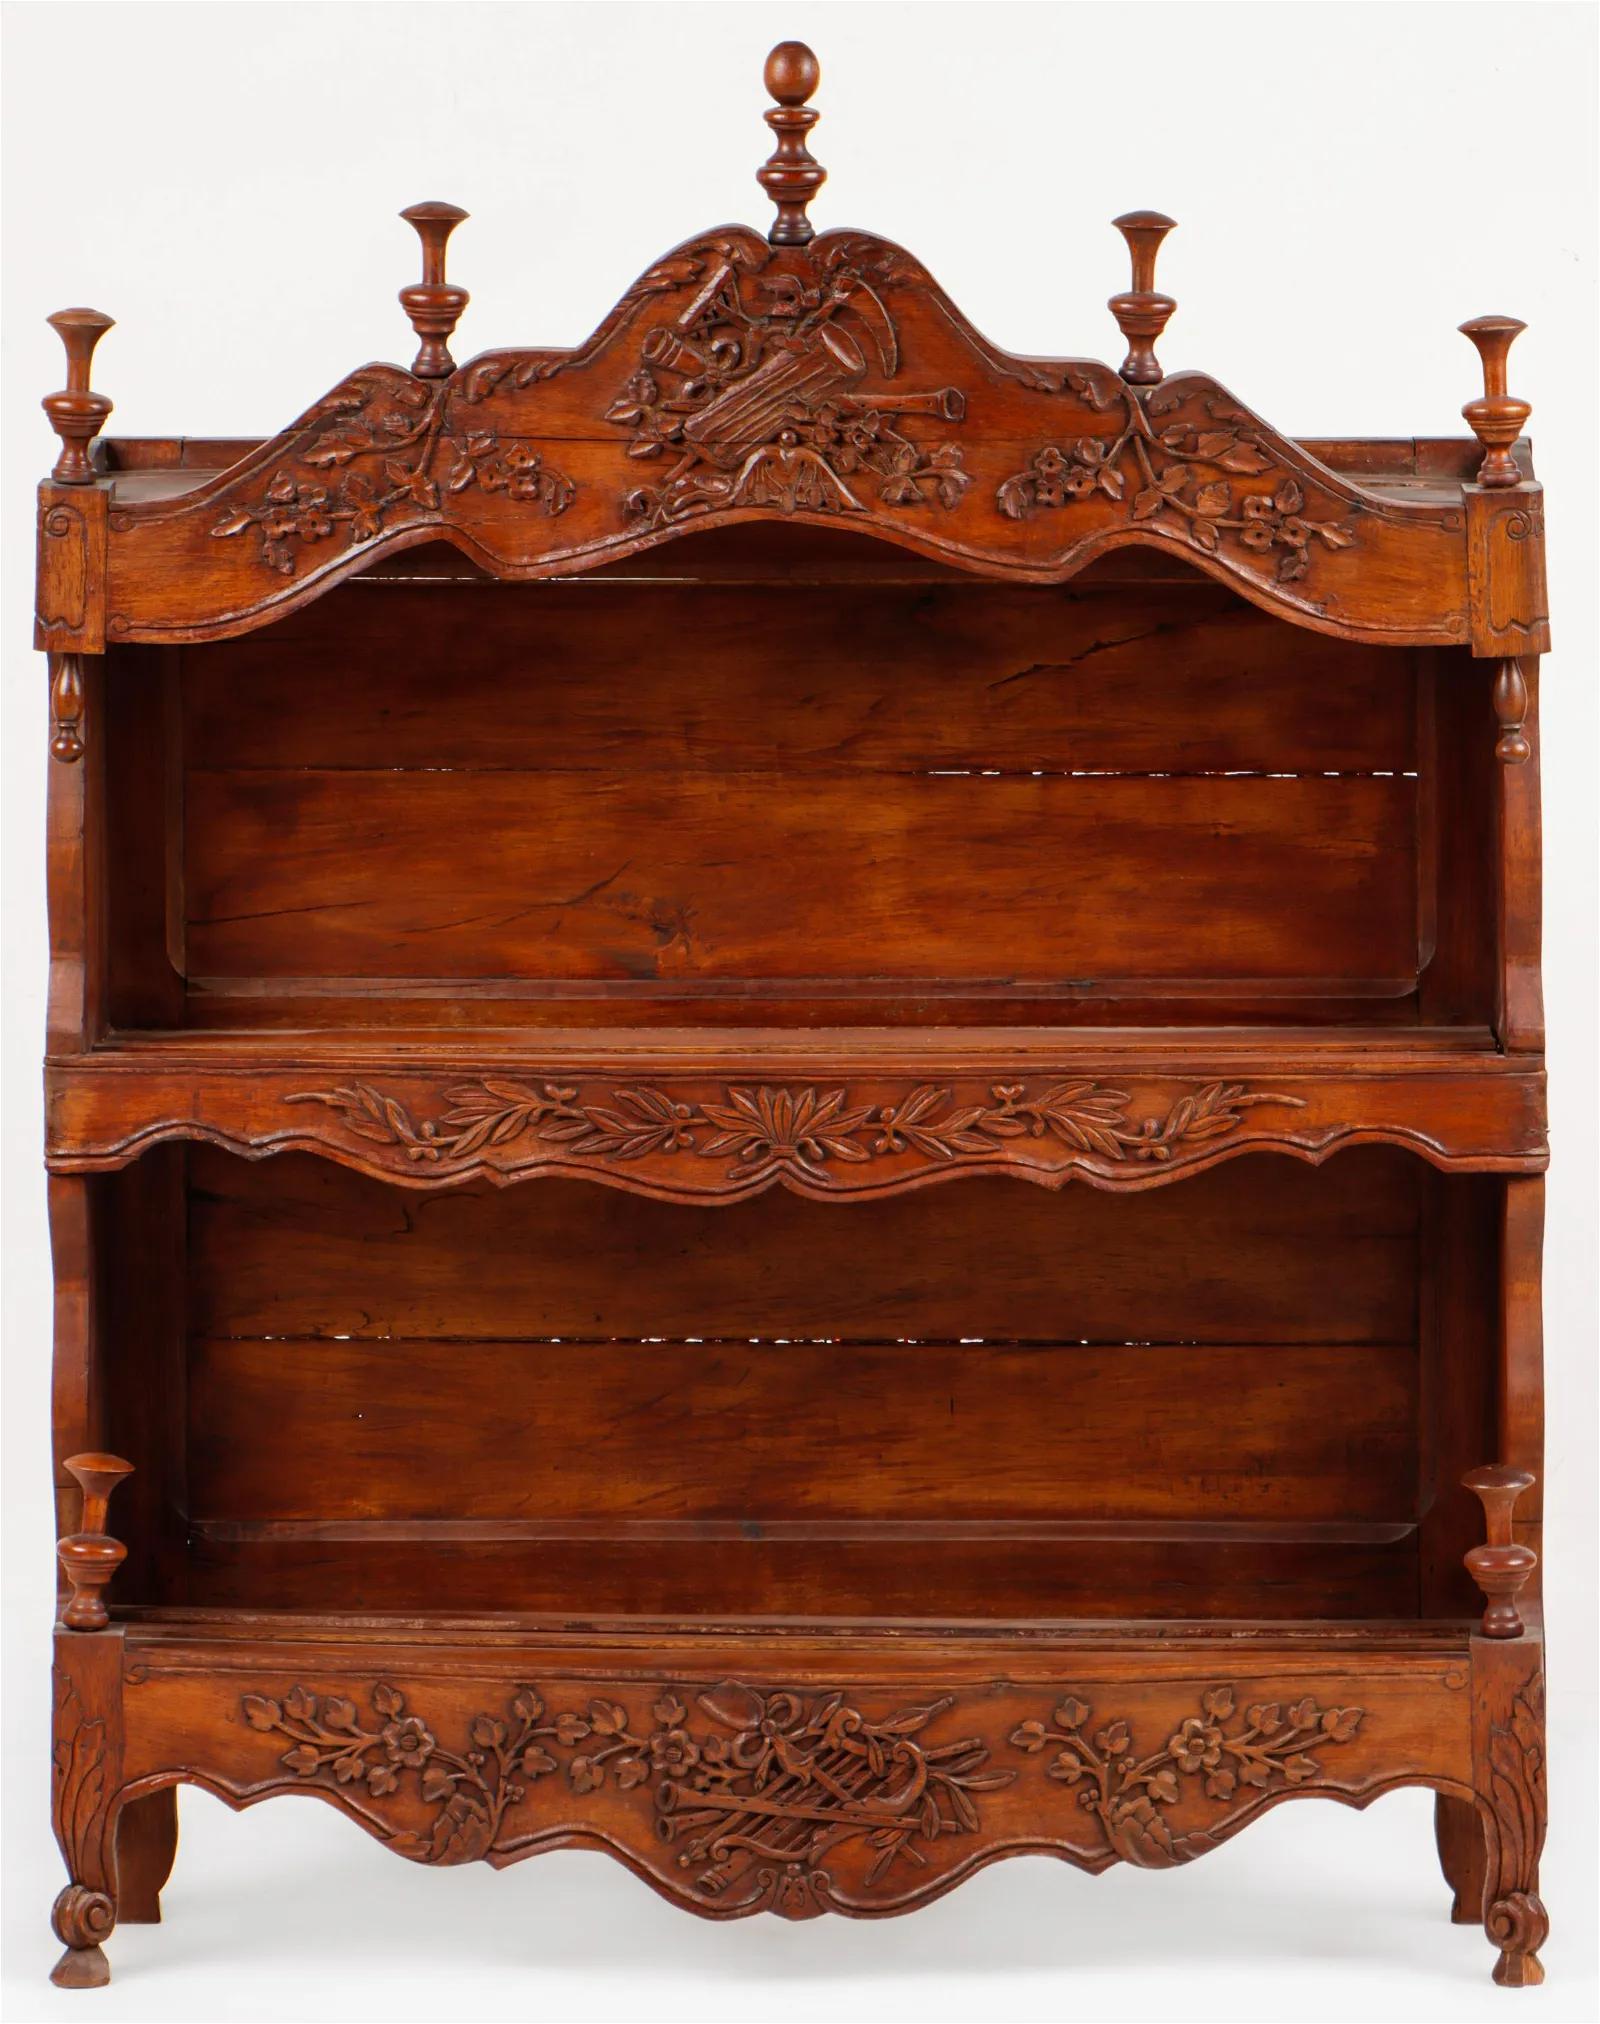 A large Louis XV style 